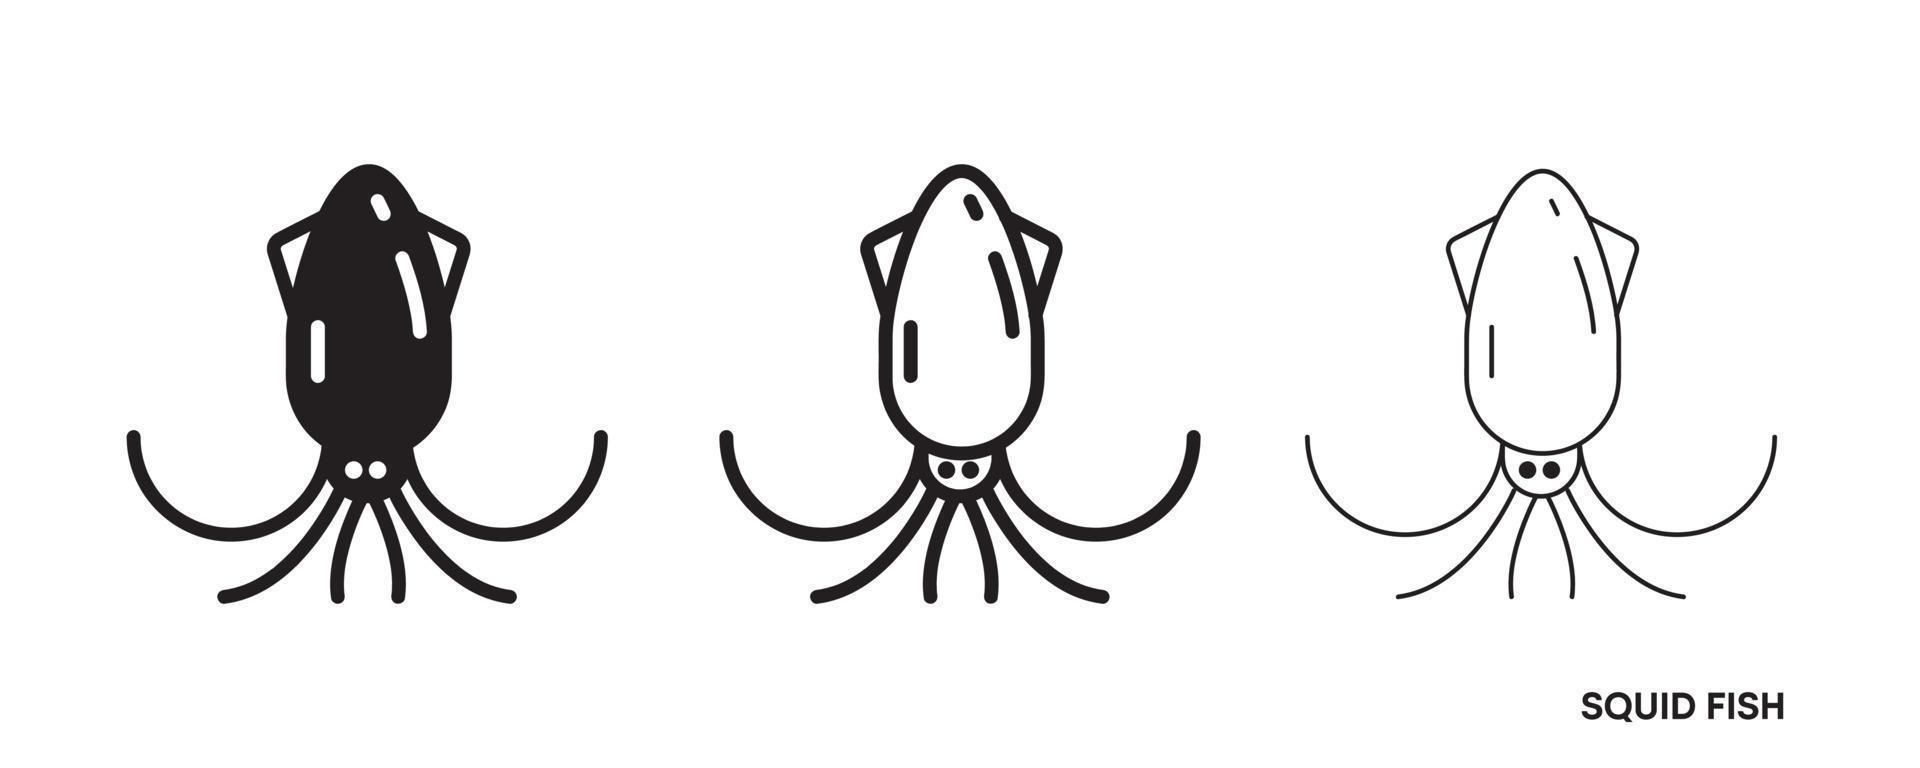 Squid fish line icon set. Such icons include thin, thick and silhouette Squid fish icon set. Editable line. Fish icon. Fish logo template. Creative vector symbol of fishing club or online web shop.